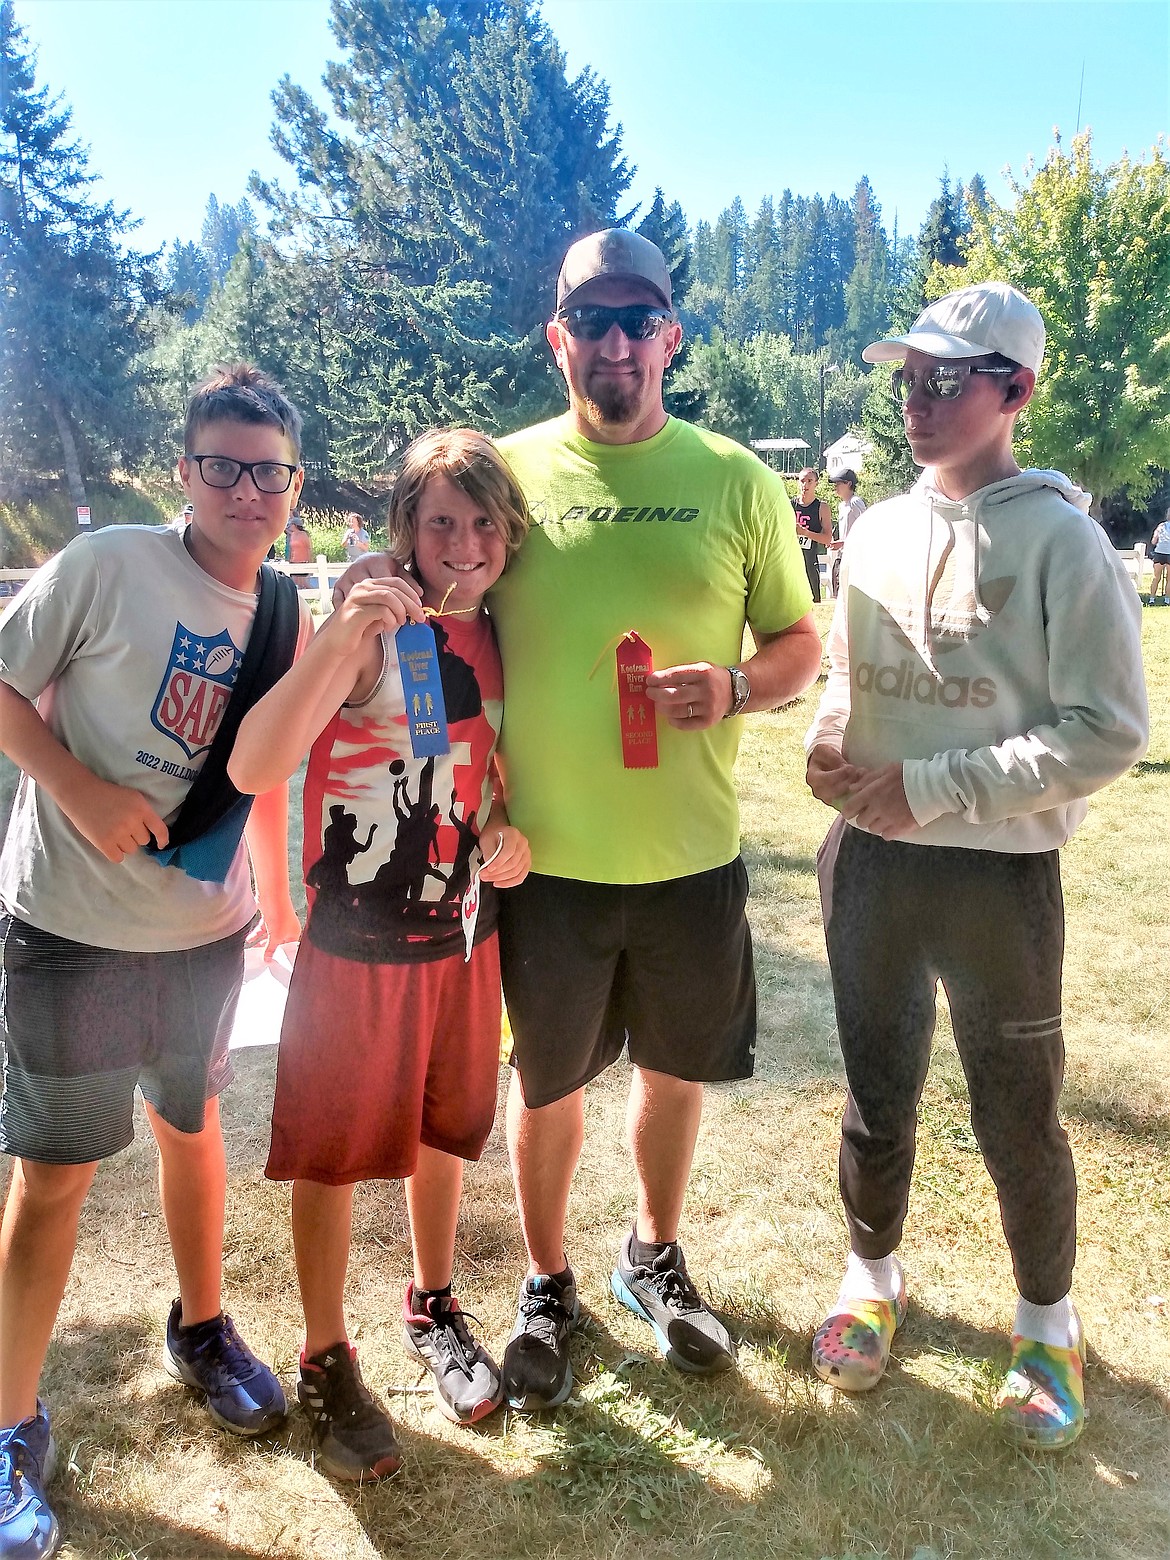 The Woelfle family shows off ribbons after the Kootenai River Run.